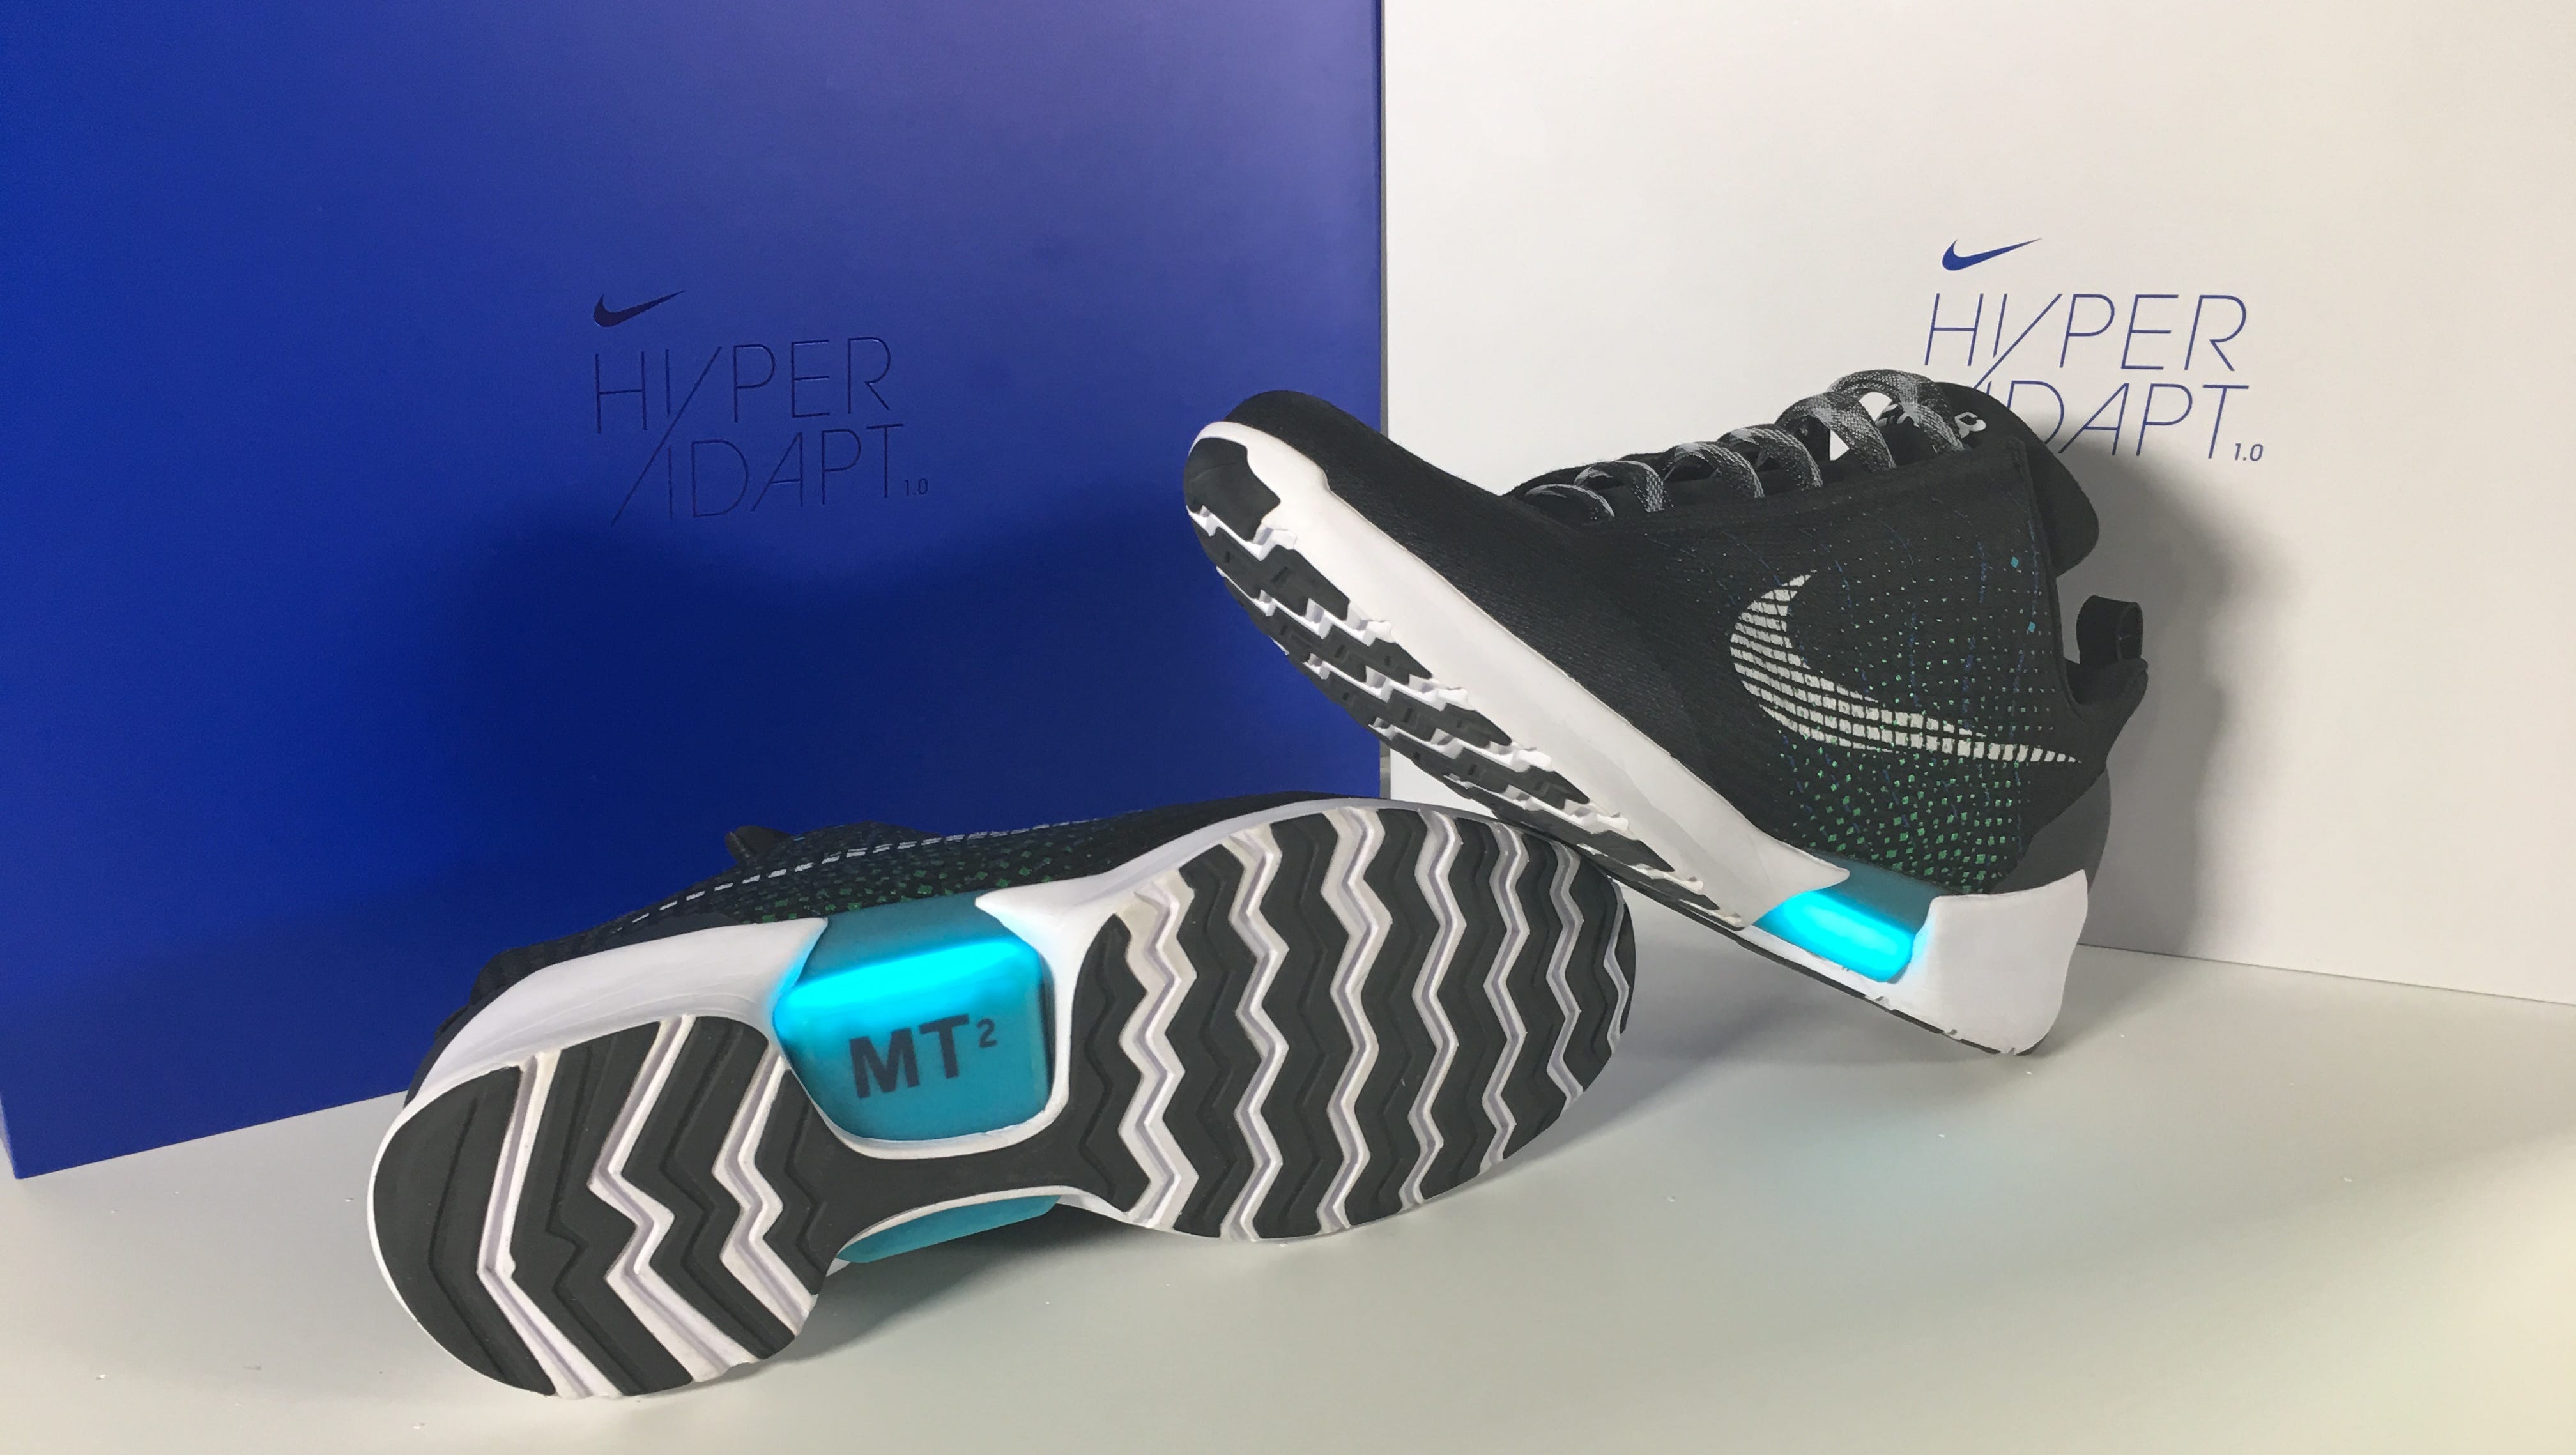 Nike's self-lacing shoes cool, but pricey